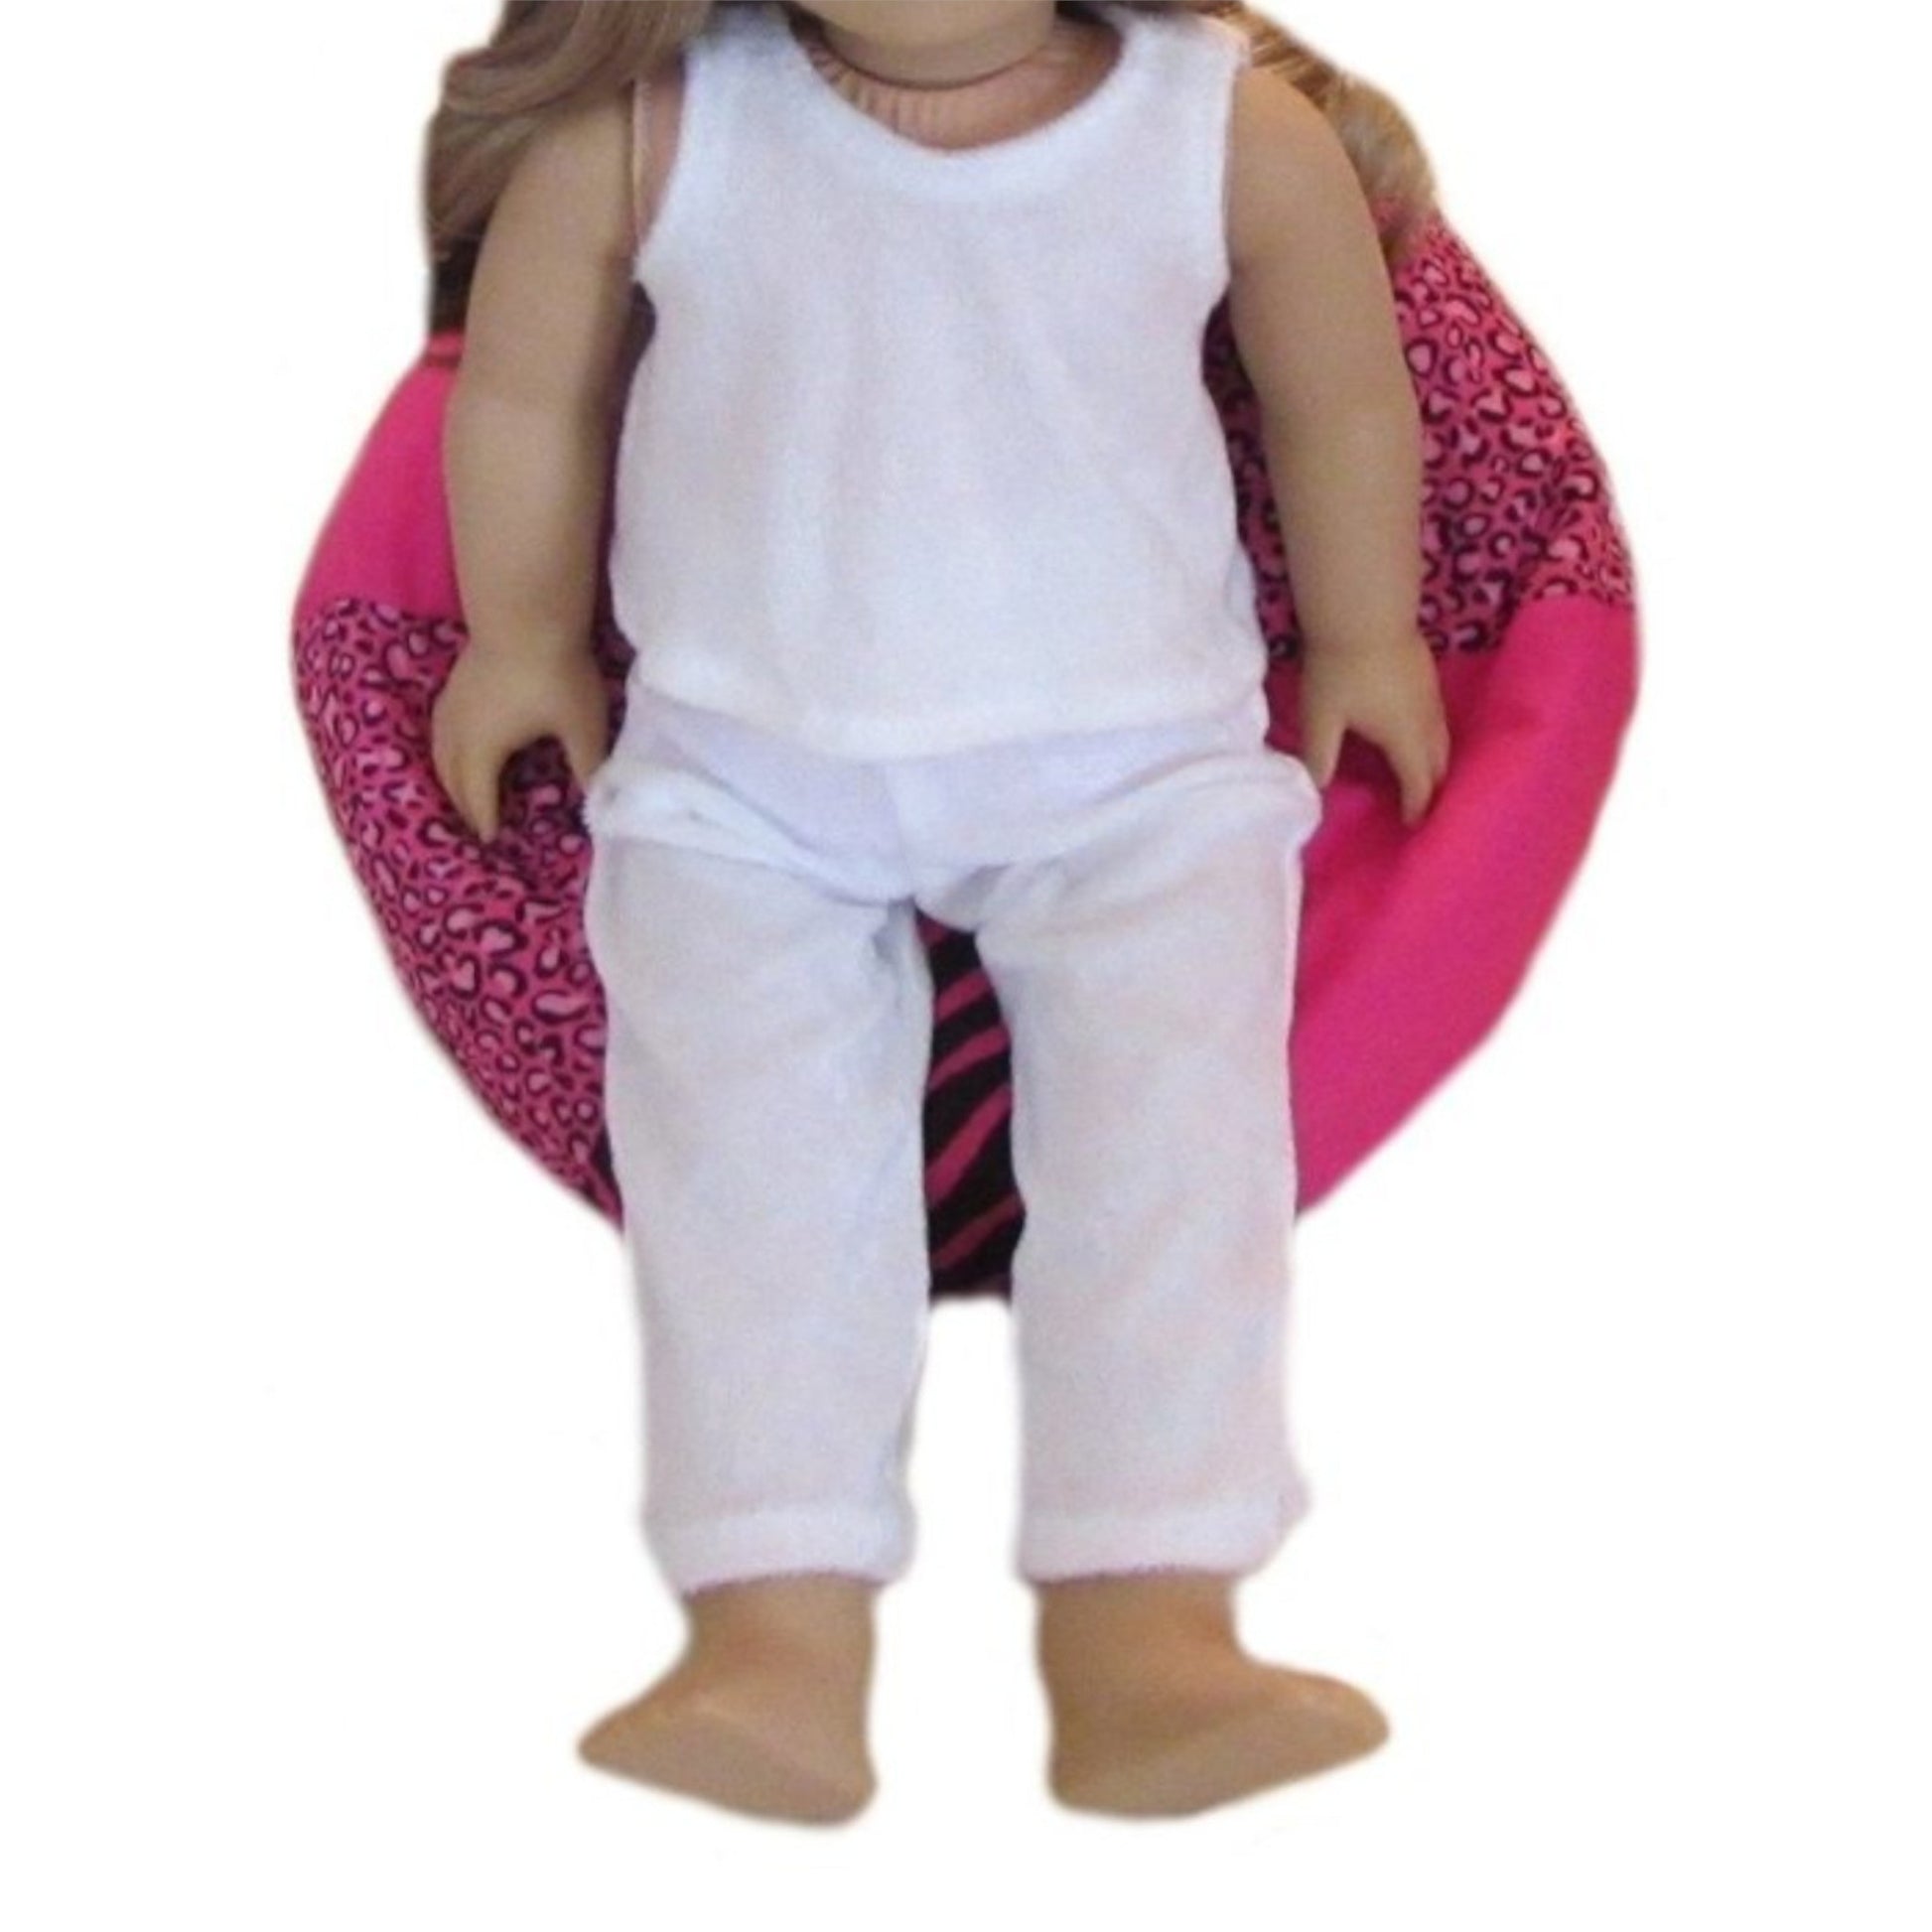 Pink Cheetah Zebra Doll Bean Bag Chair for 18-inch dolls with doll